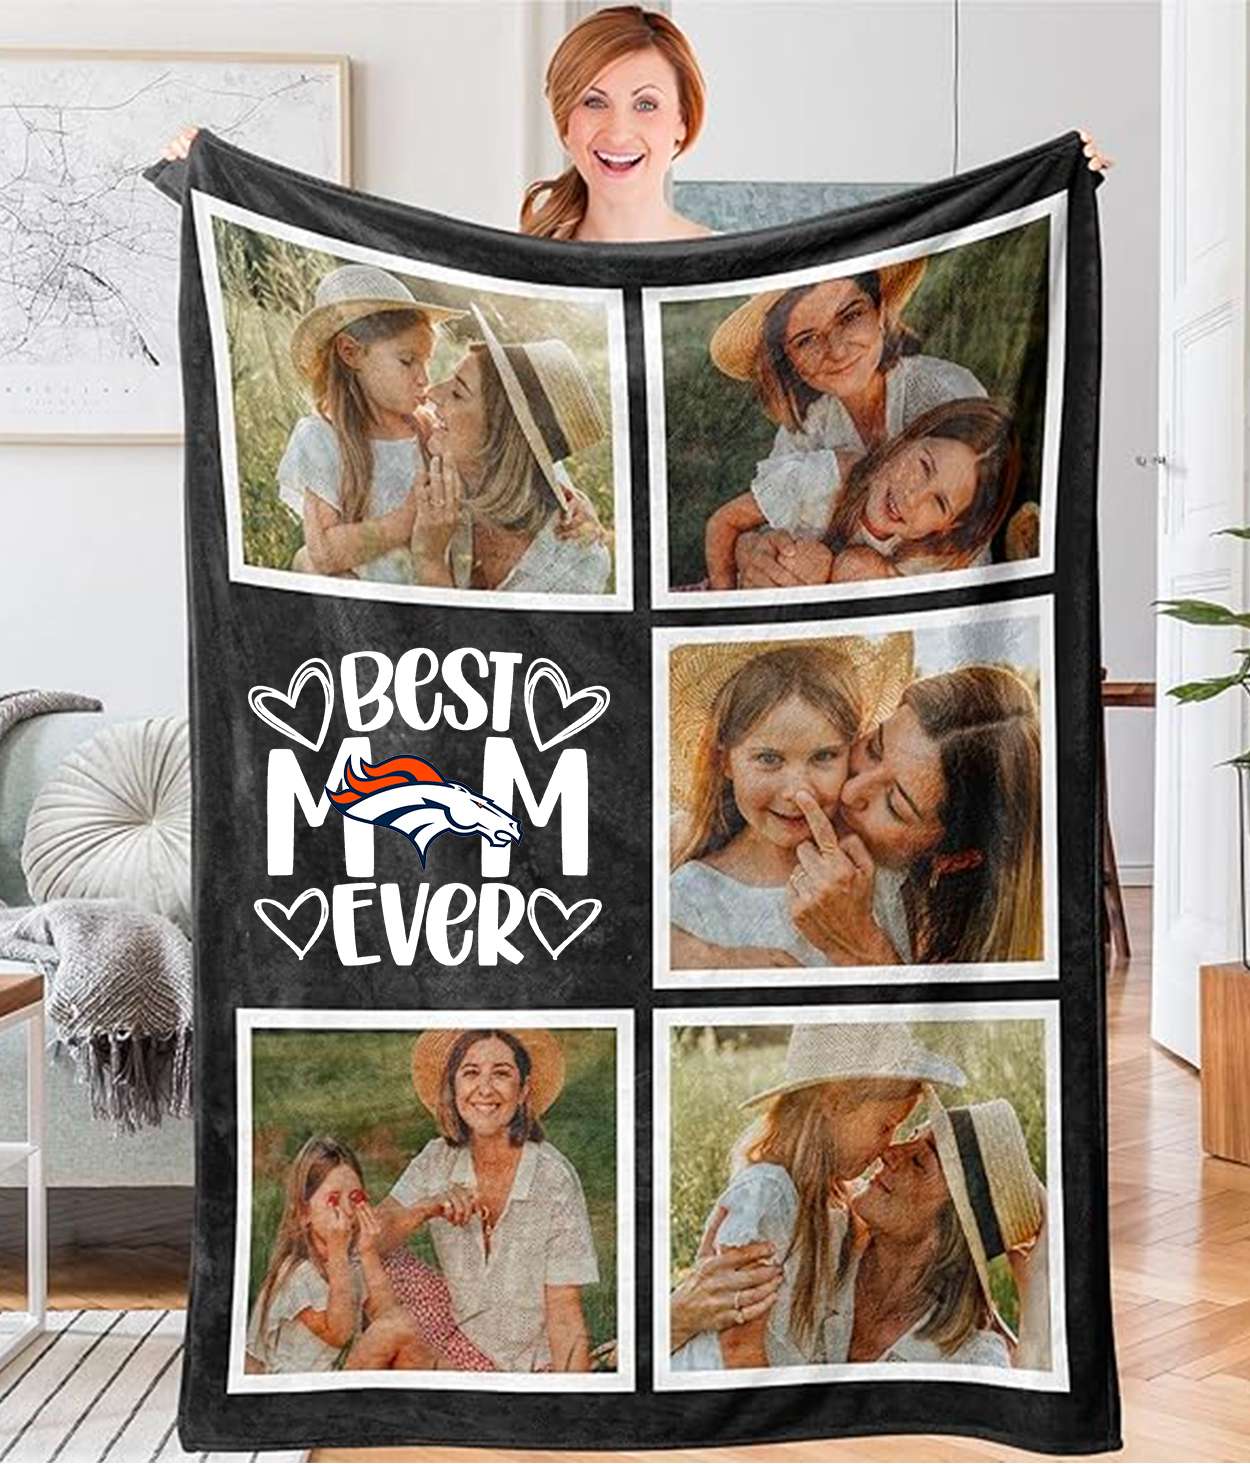 Best Mom Ever - Custom NFL Denver Broncos Blankets with Pictures for Mother's Day Gift